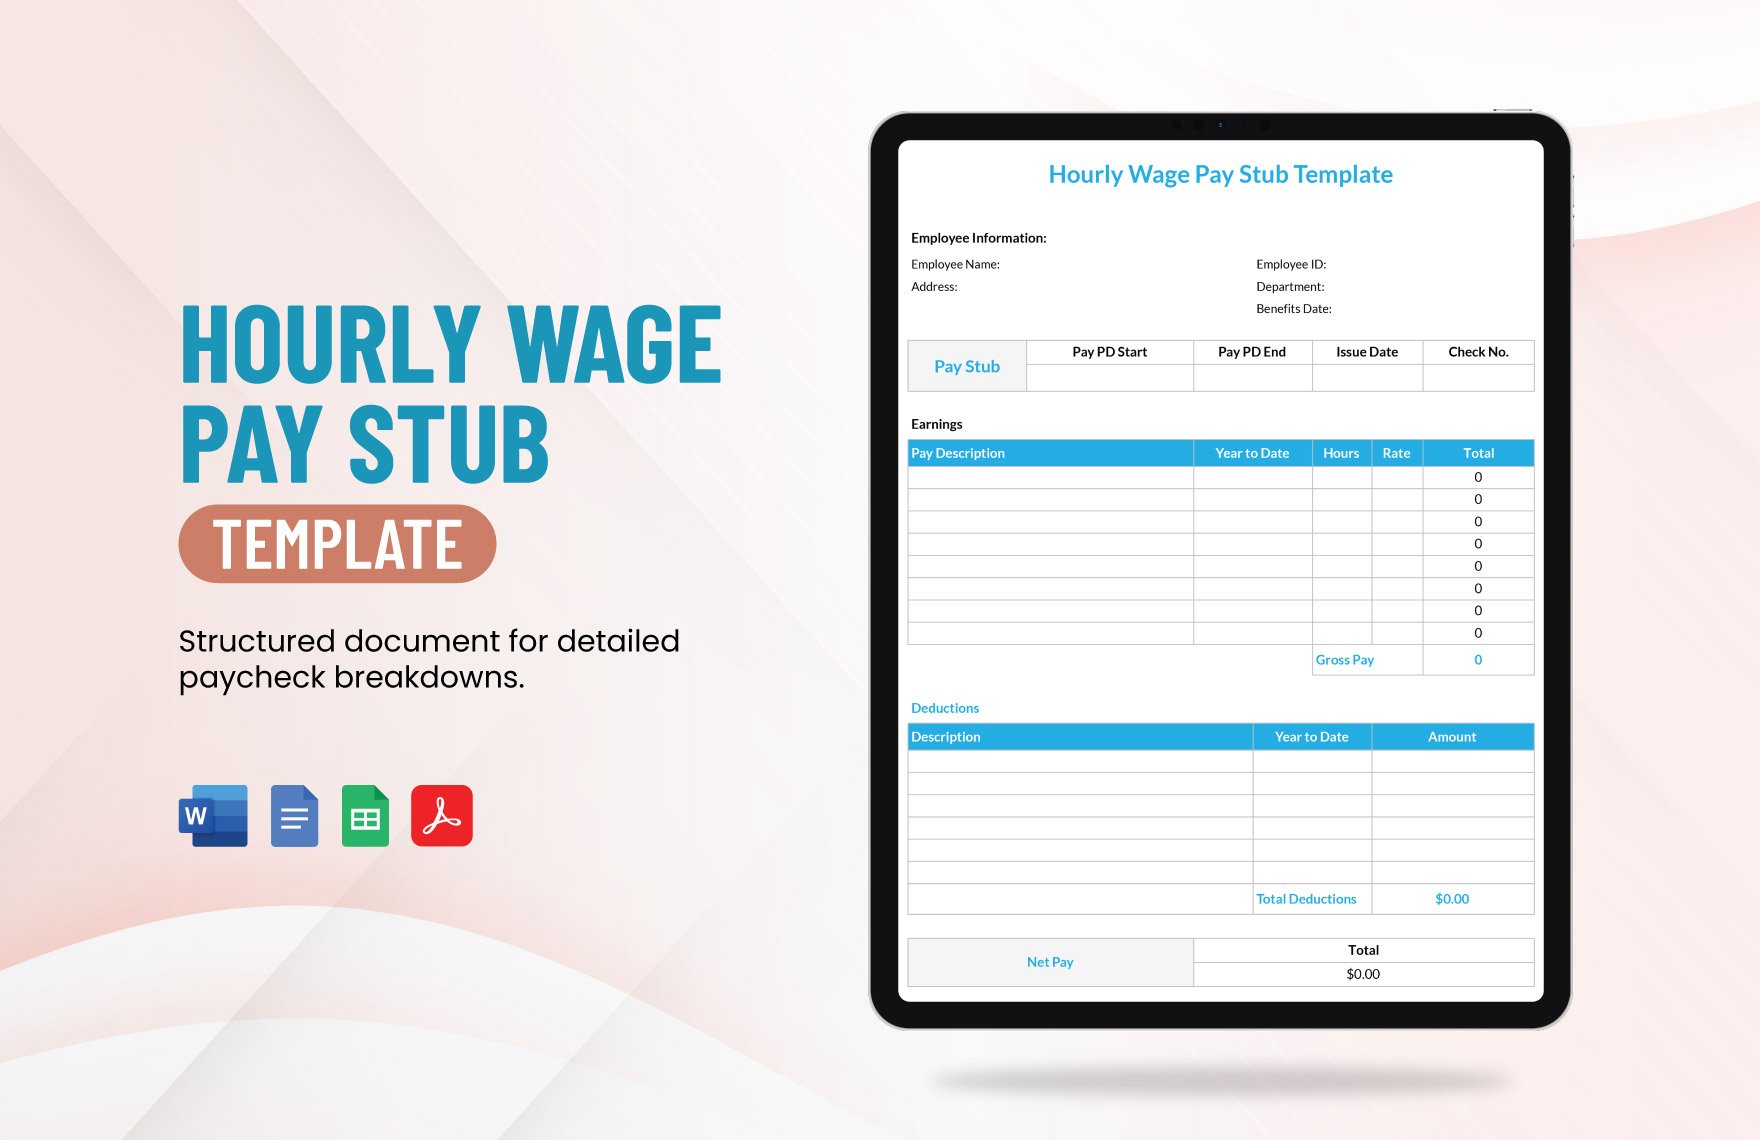 Hourly Wage Pay Stub Template in Word, Google Docs, PDF, Google Sheets